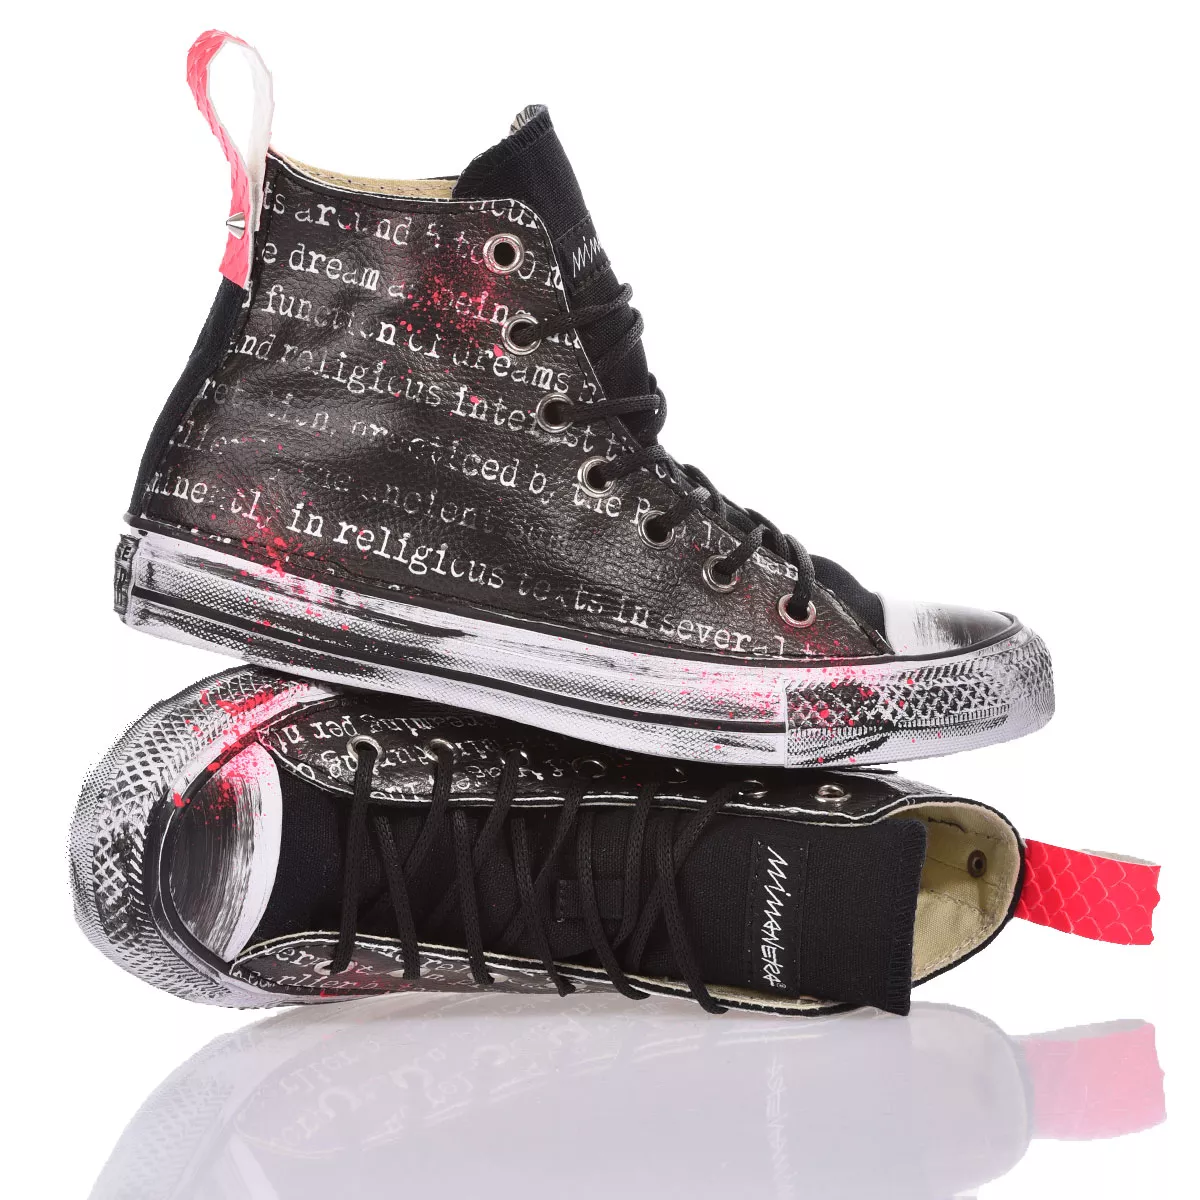 Converse Type Black High Top Special